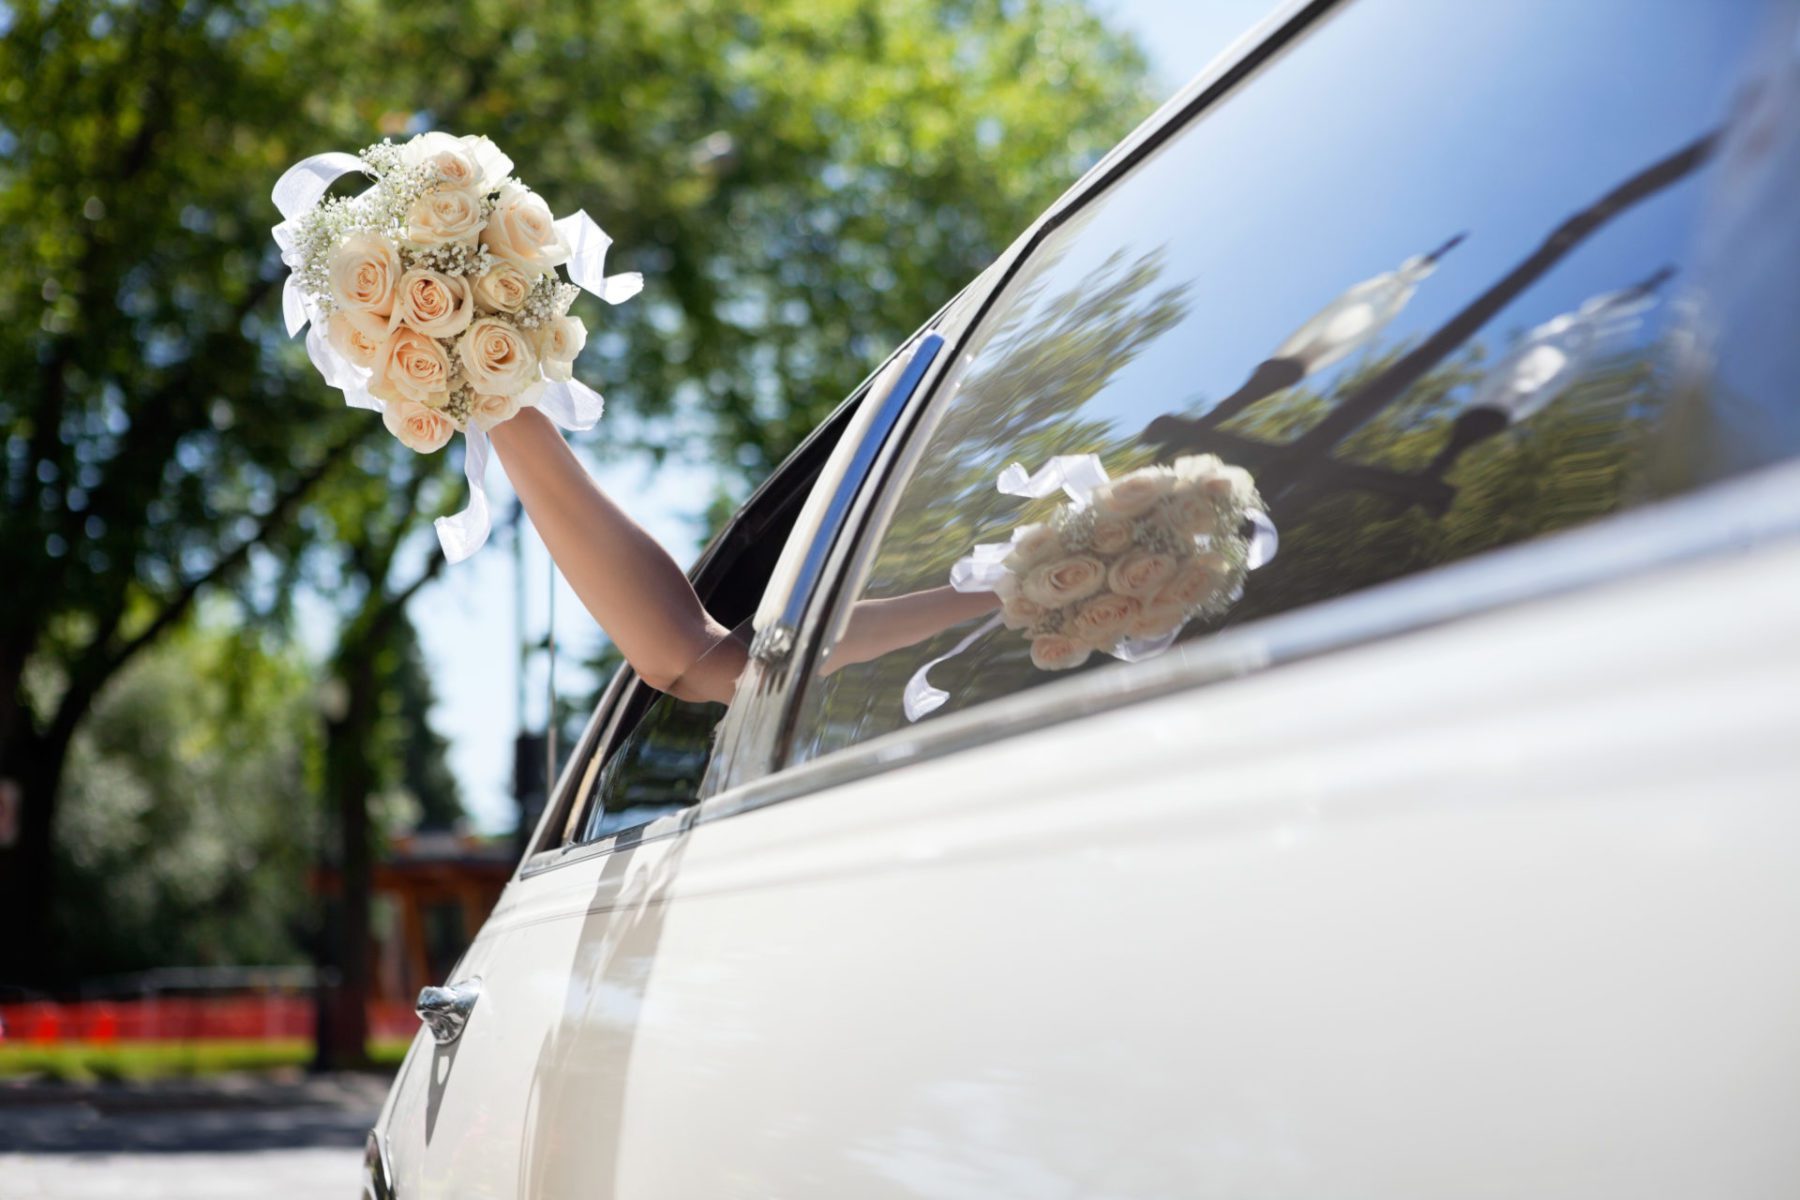 Explore Options to Book Perfect Limousine for Your Wedding Day in New York City